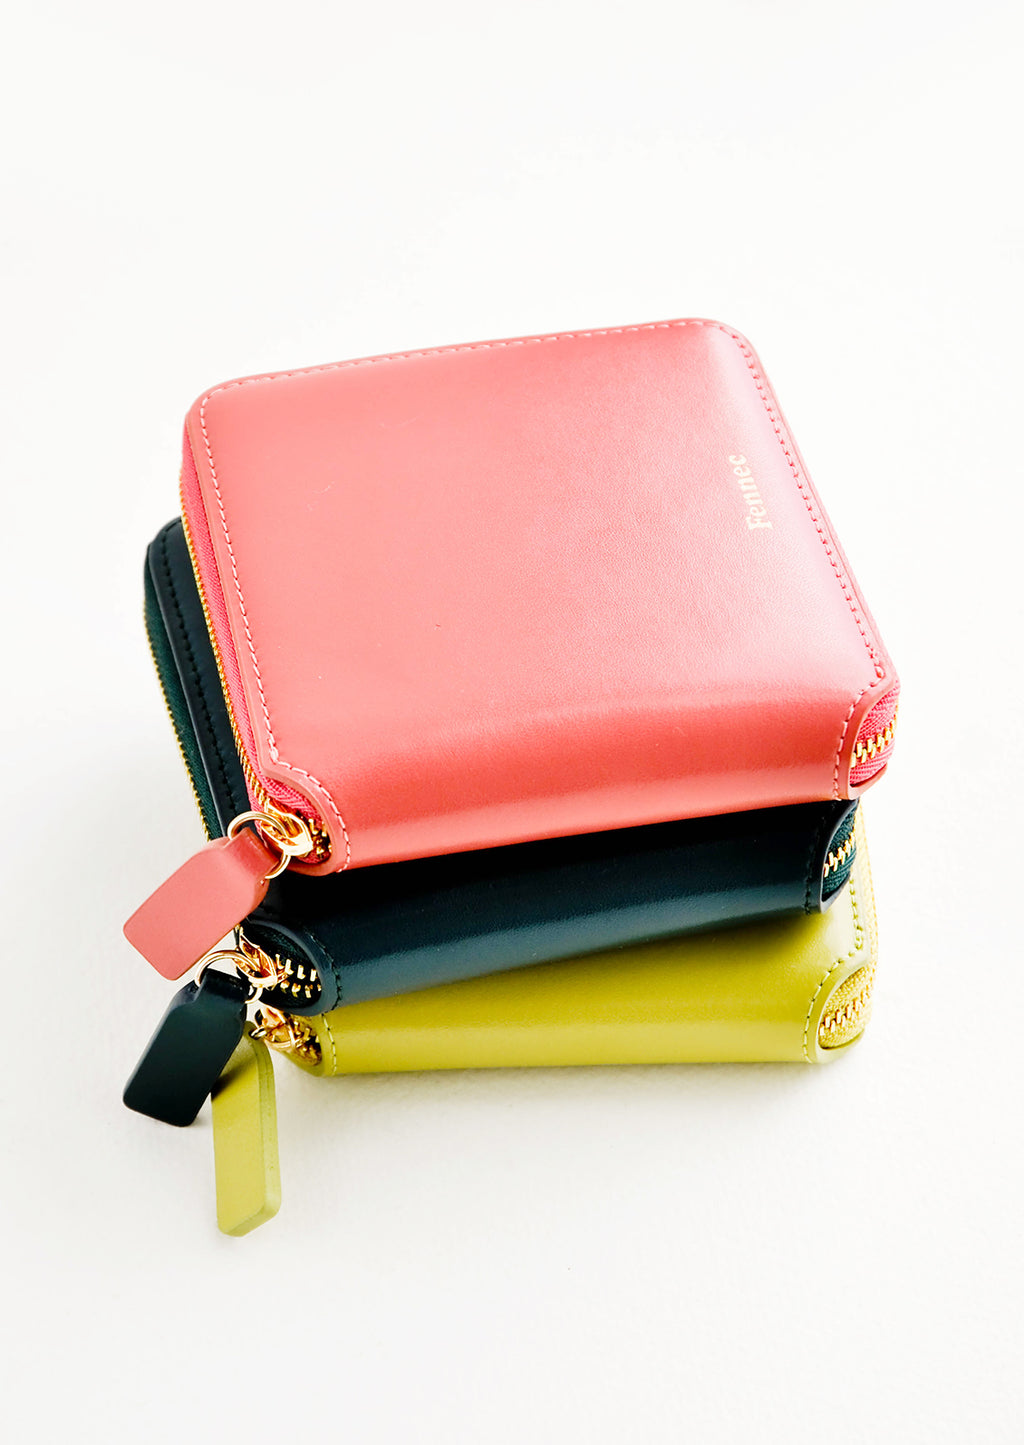 3: Product show showing multiple colors of zip wallets in a stack.